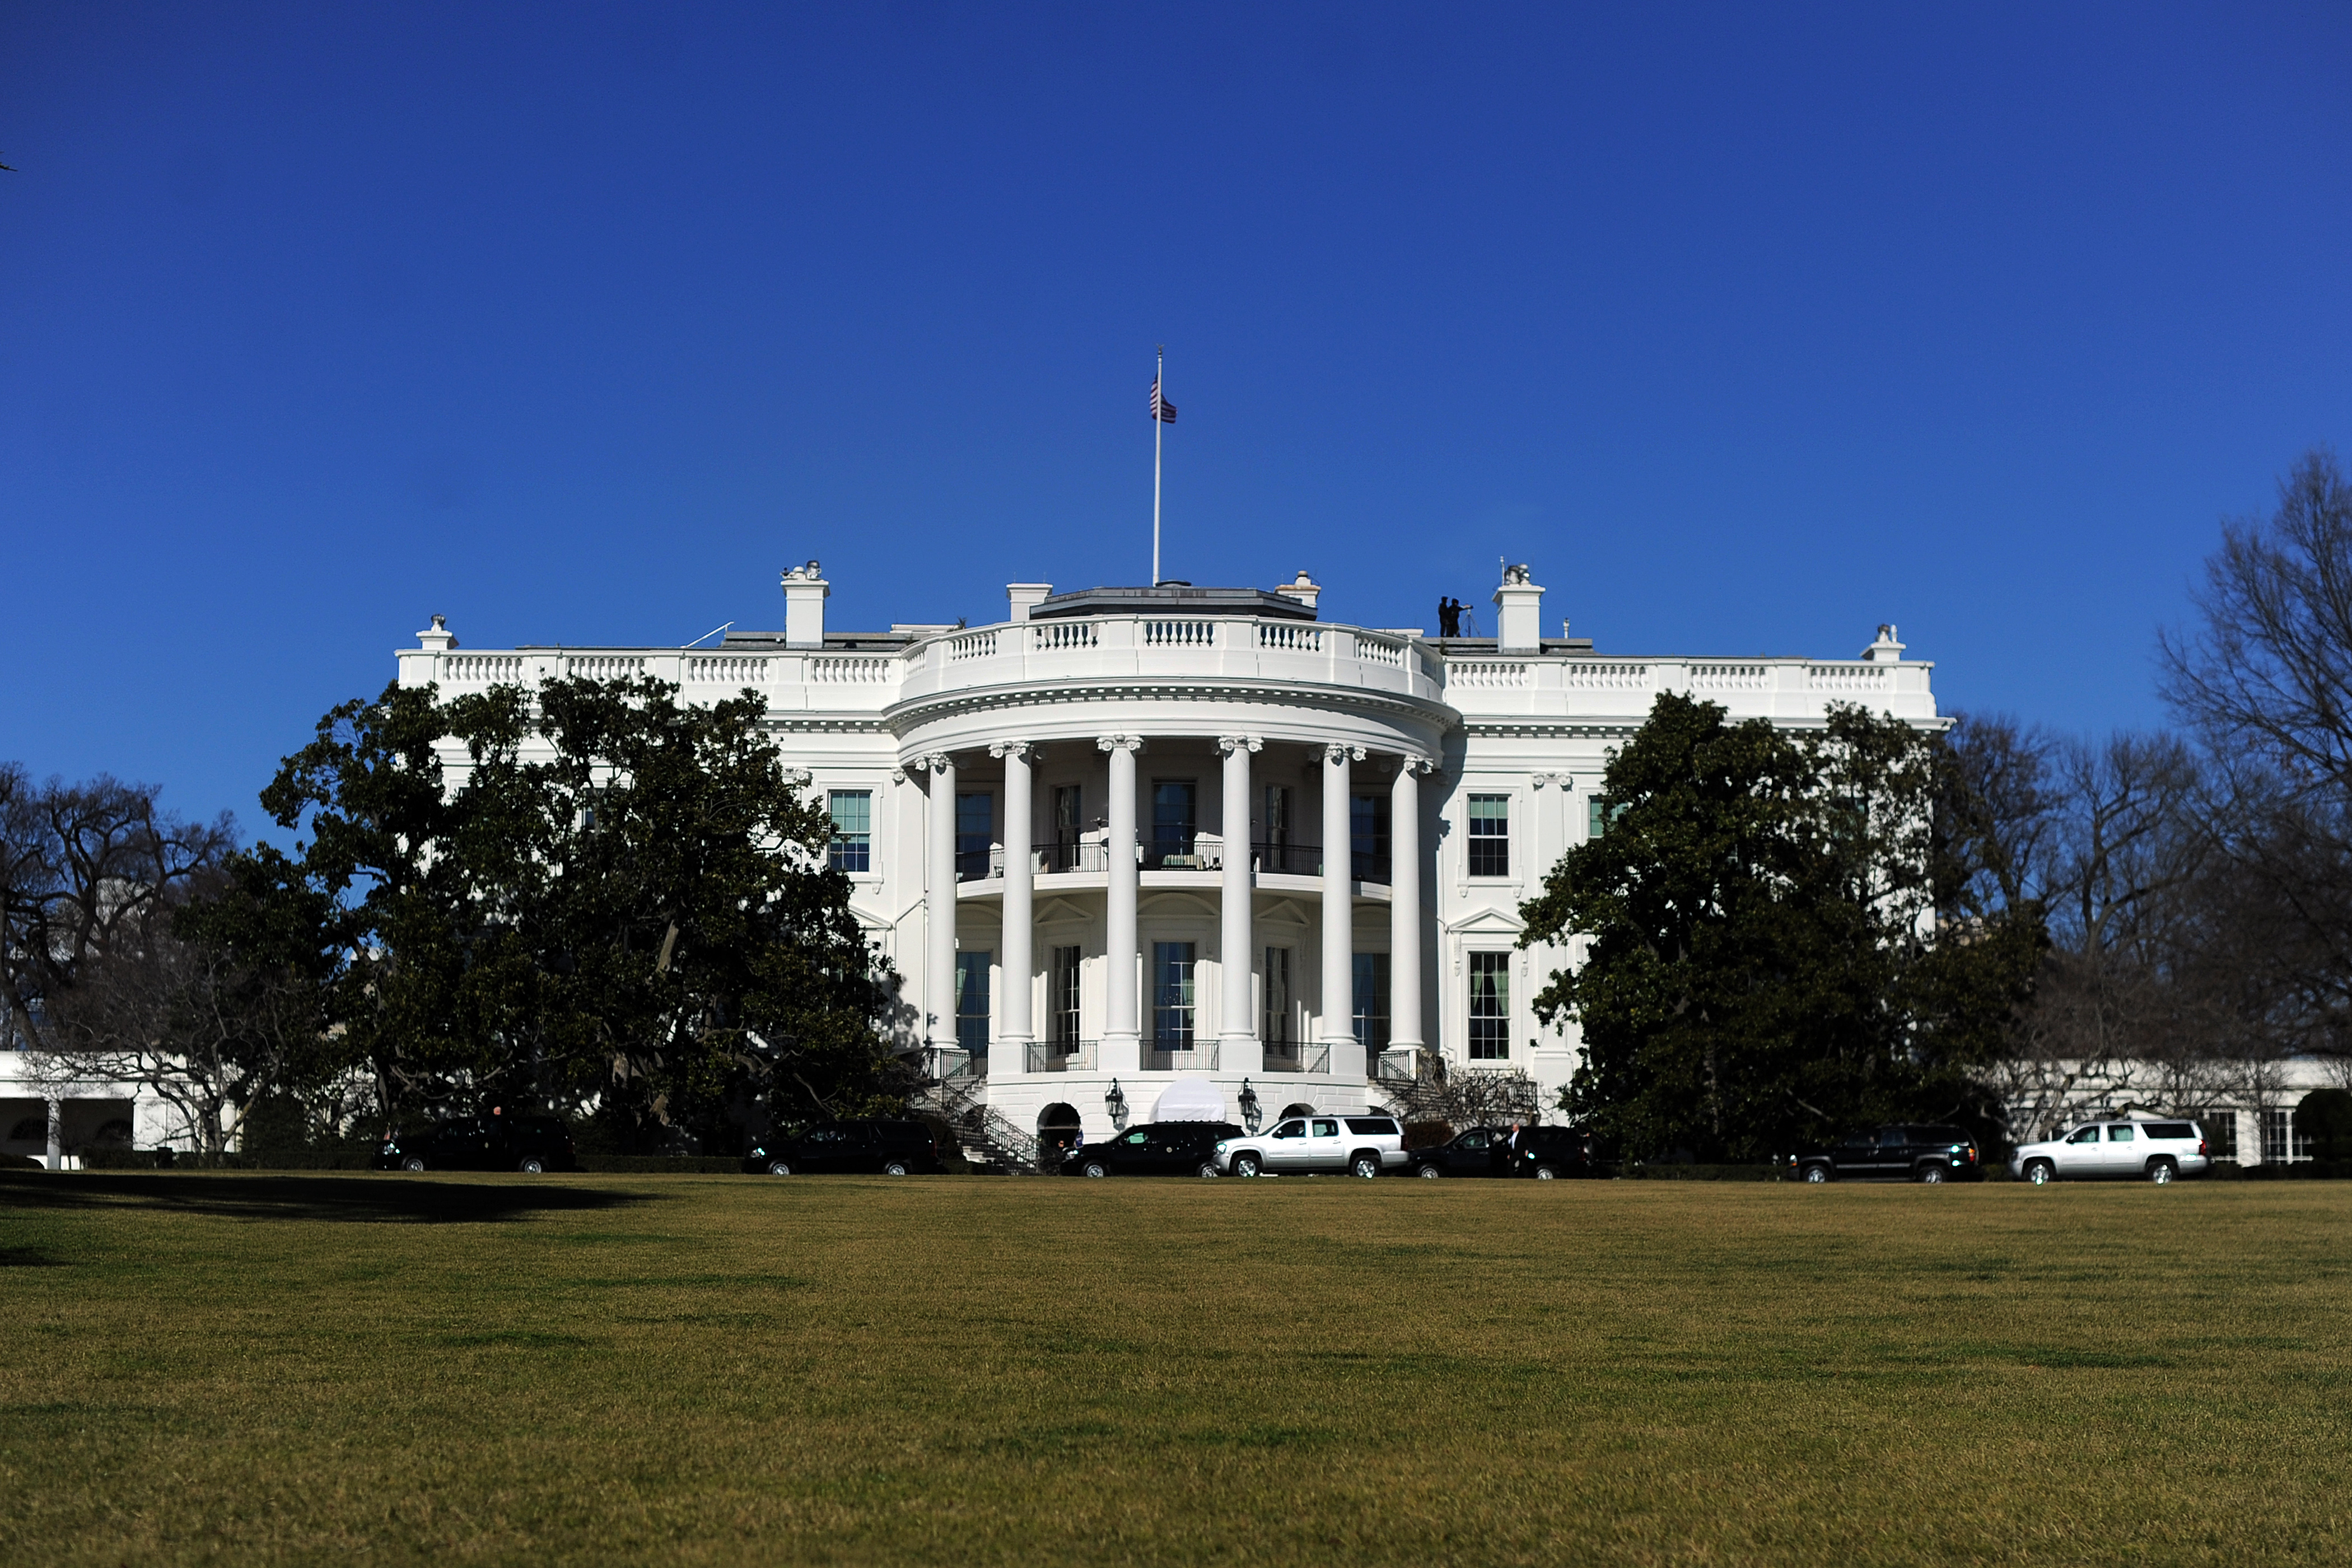 White House tours canceled, apparently due to sequester CBS News